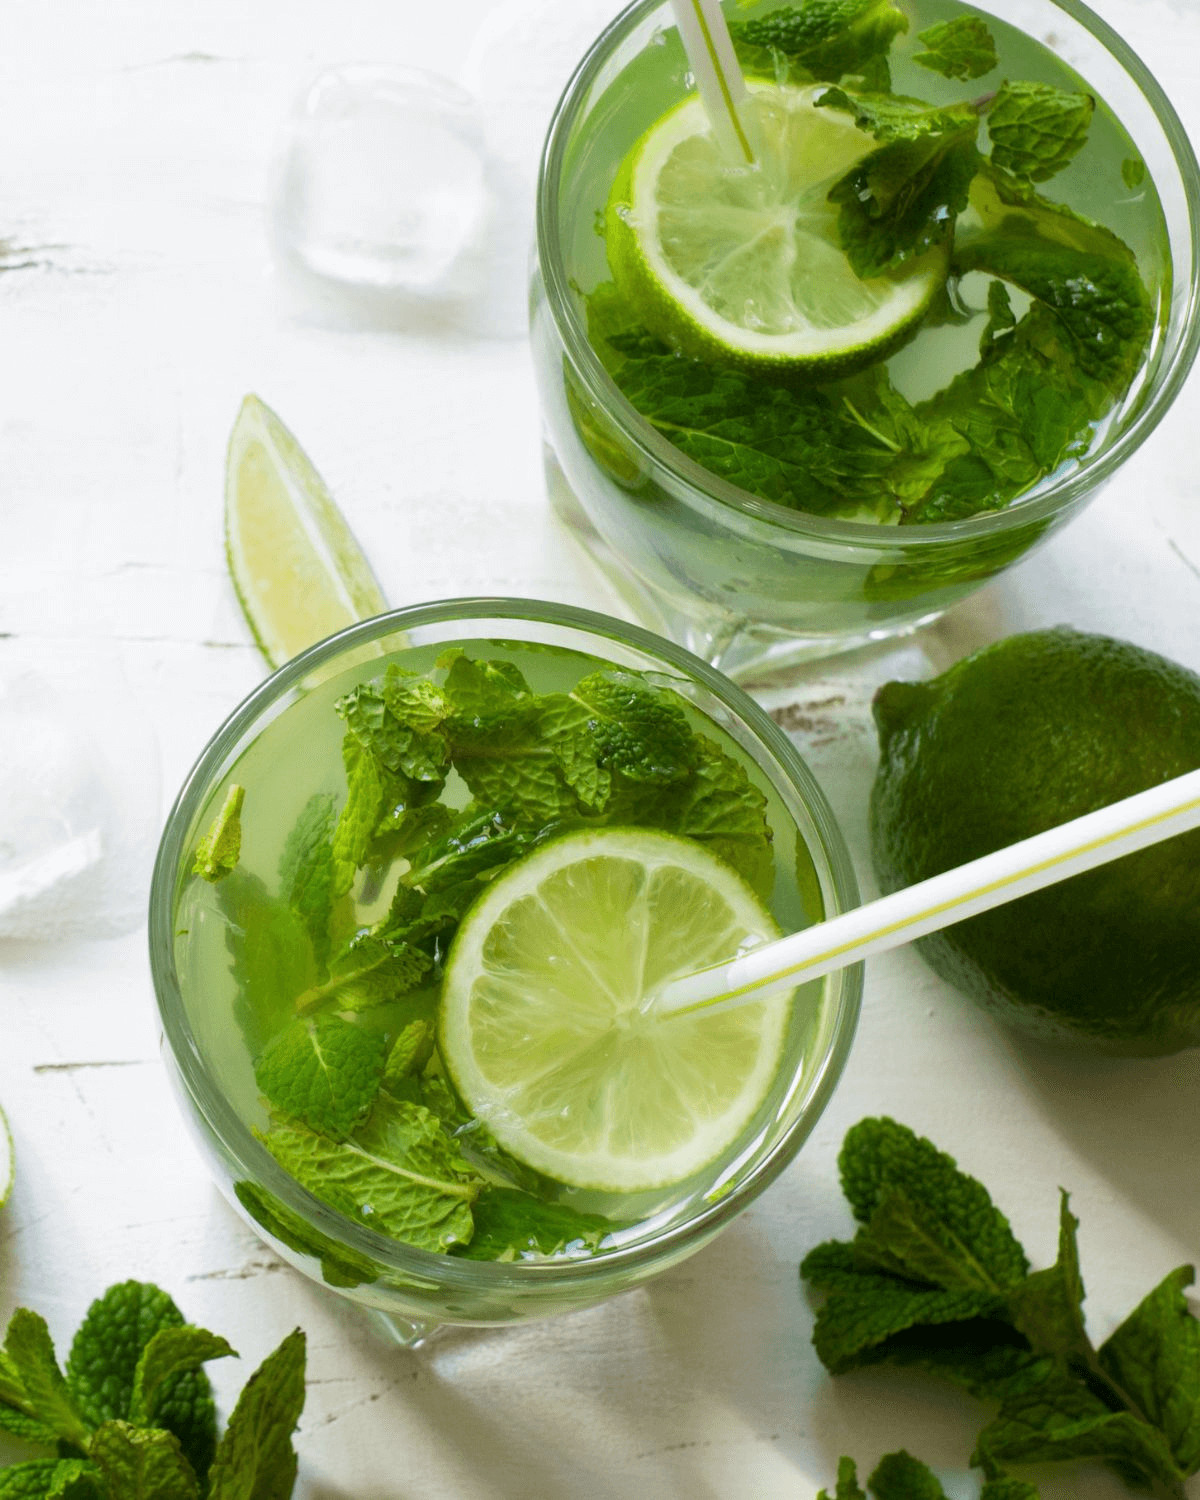 A top view of the bacardi cuban mojito.